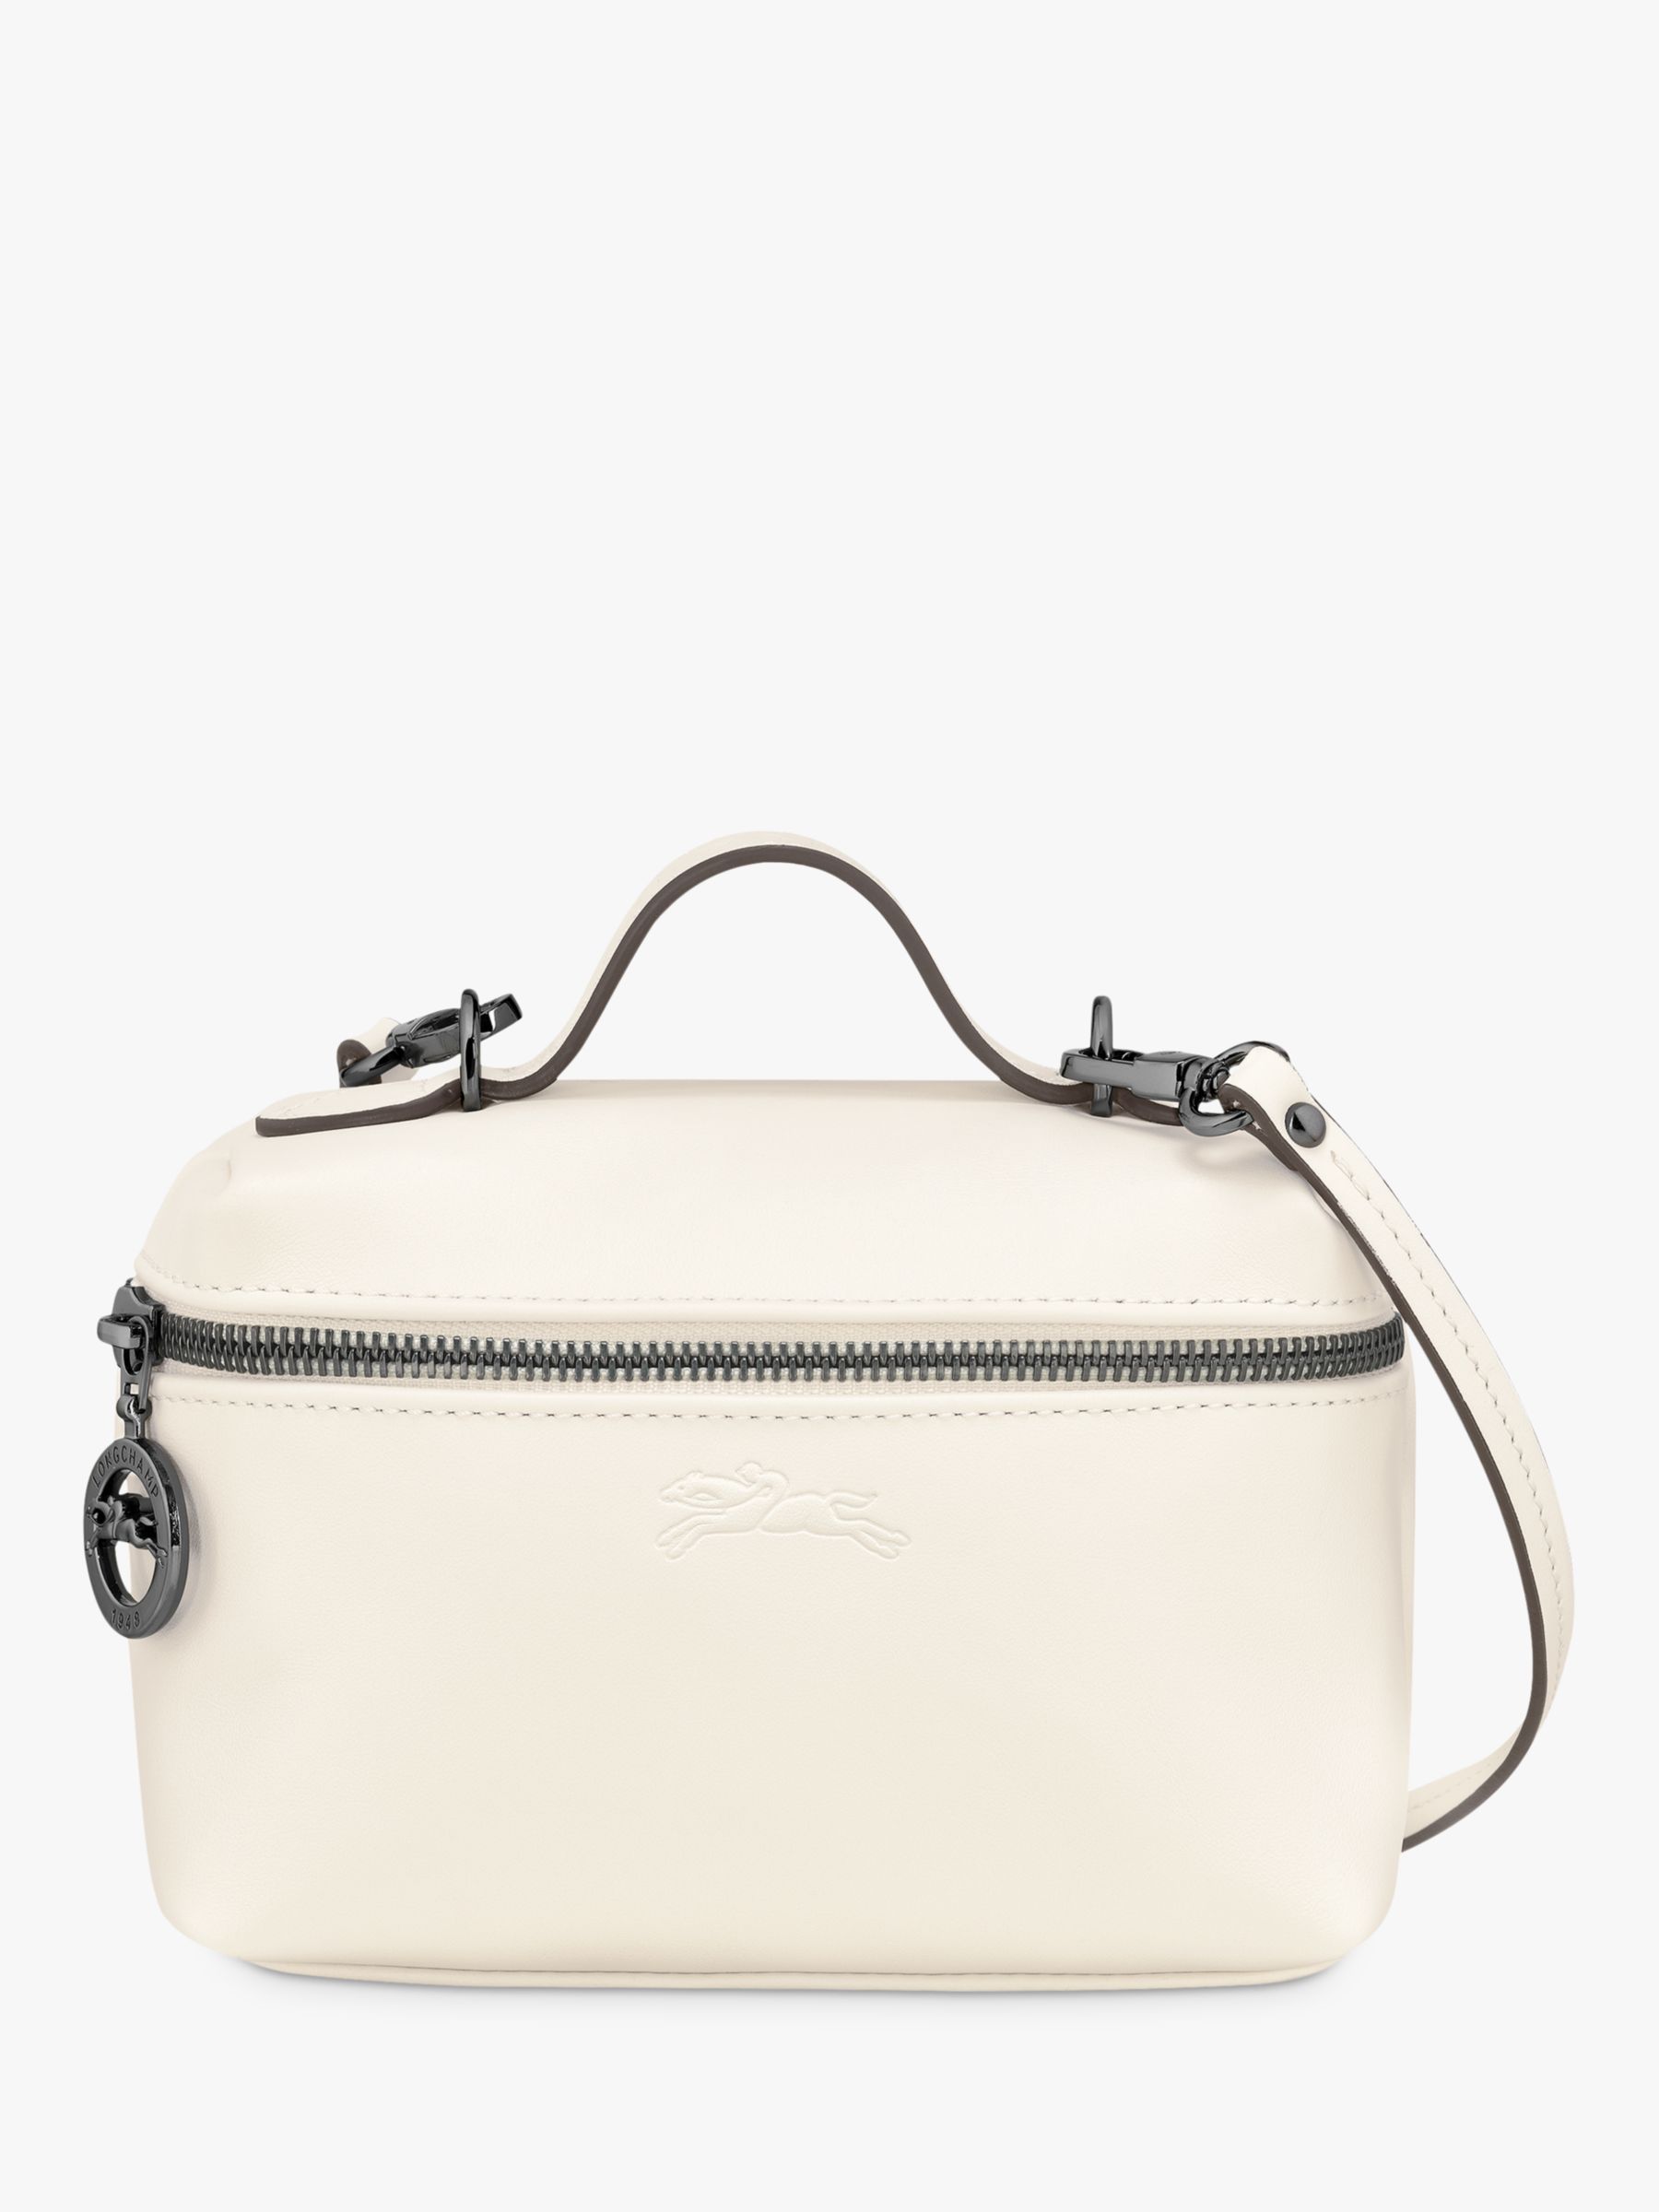 Buy Longchamp Le Pliage Xtra Extra Small Vanity Bag Online at johnlewis.com